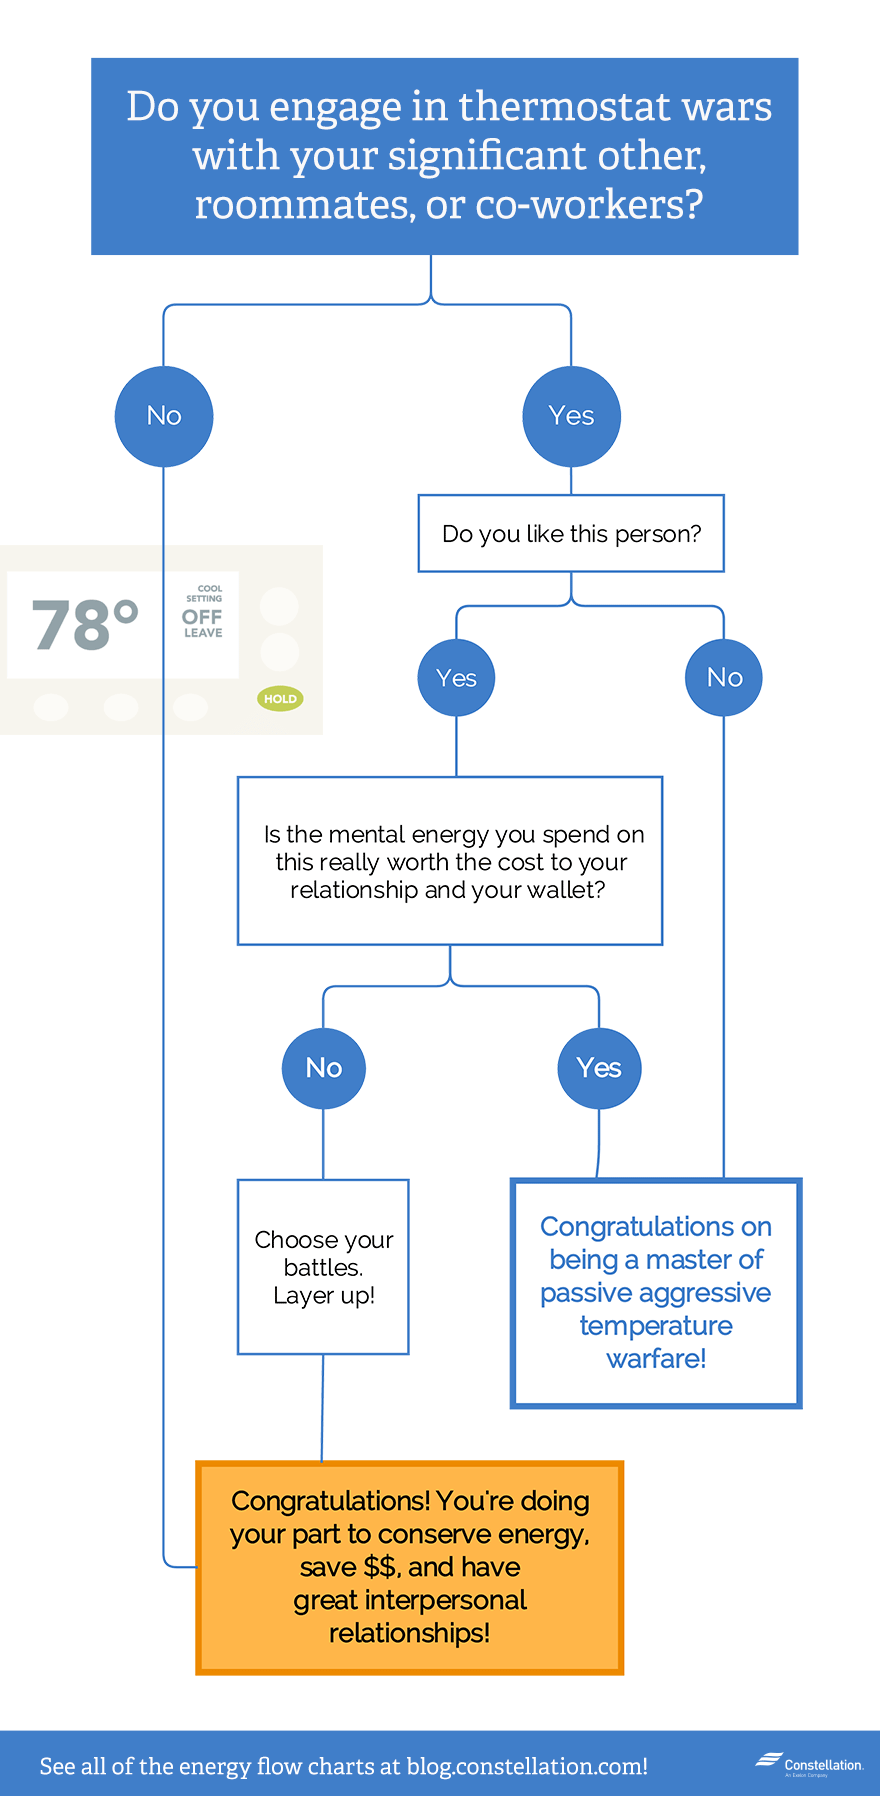 Do you engage in thermostat wars? (Flowchart)